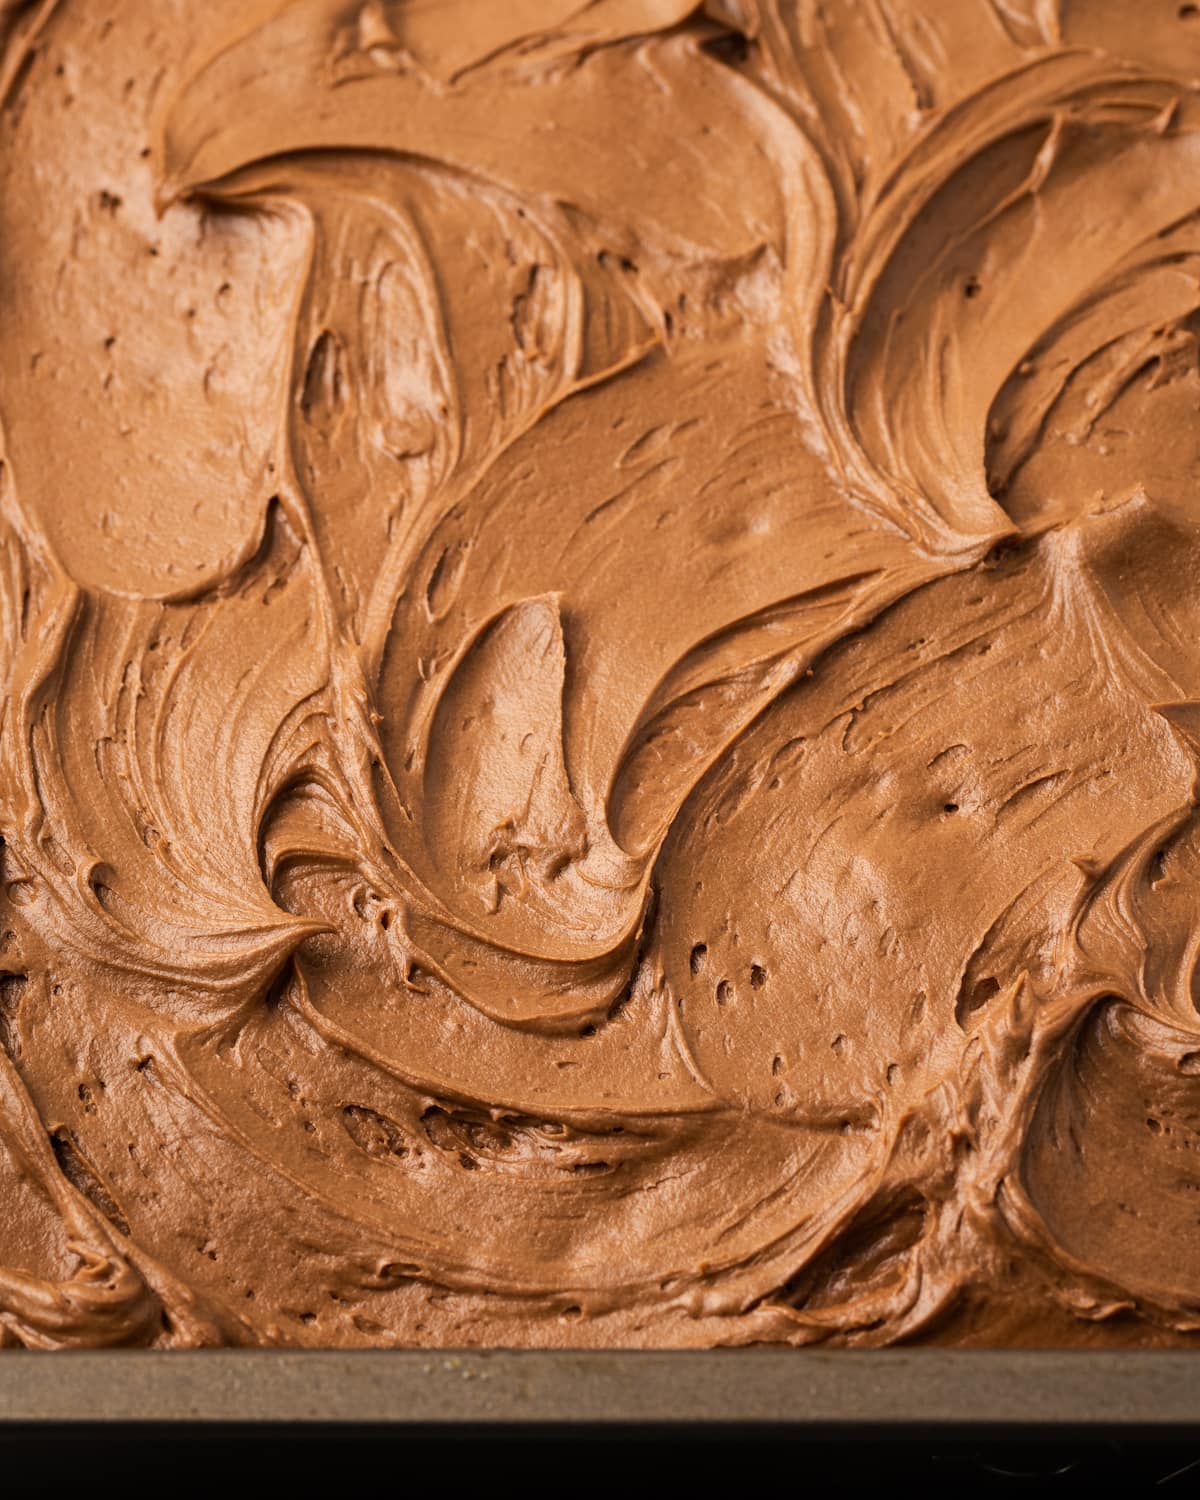 Creamy chocolate frosting spread over a sour cream cake in a baking pan.